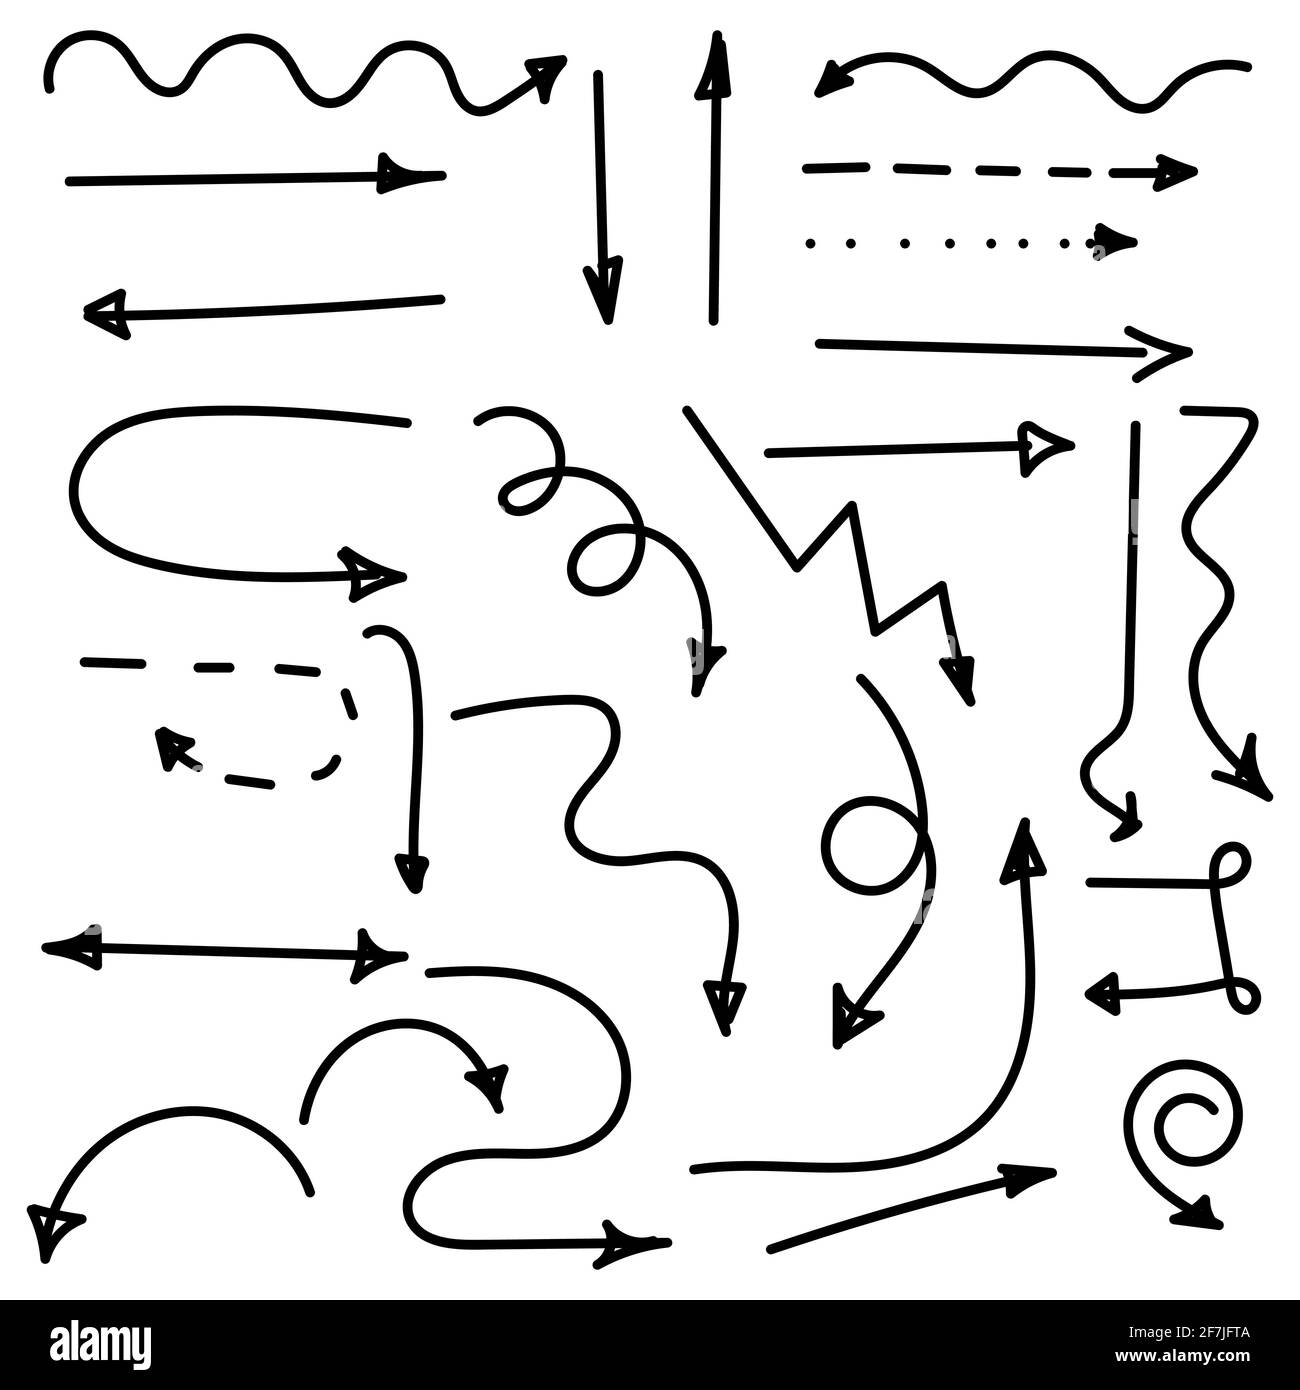 Set Of Hand Drawn Vector Curved Arrows Arrow Icons With Various Directions Doodle Style 9286